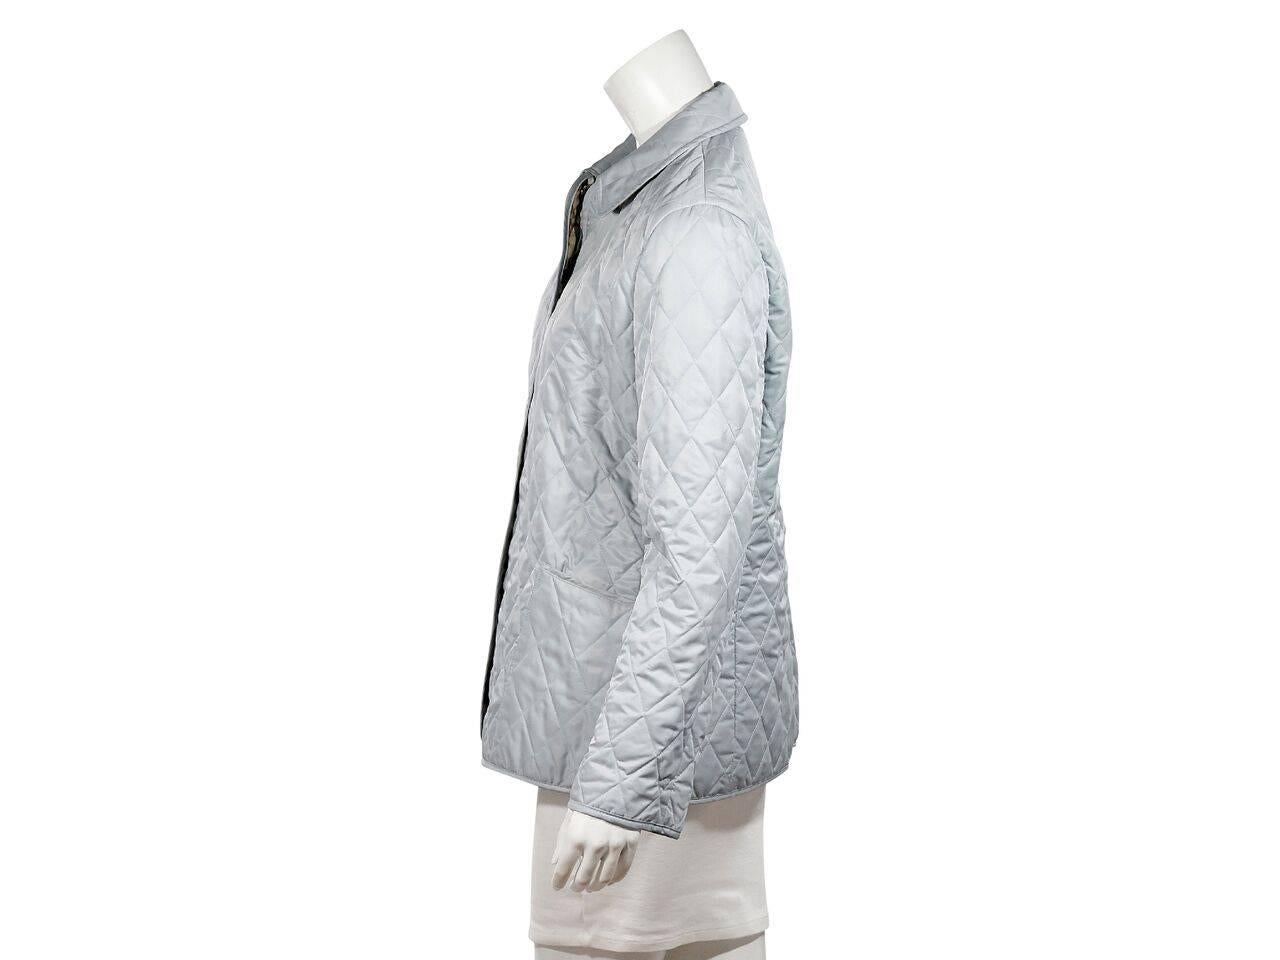 Product details:  Light blue quilted jacket by Burberry London.  Spread collar.  Long sleeves.  Snap-front closure.  Waist patch pockets.  
Condition: Pre-owned. Very good.
Est. Retail $ 998.00